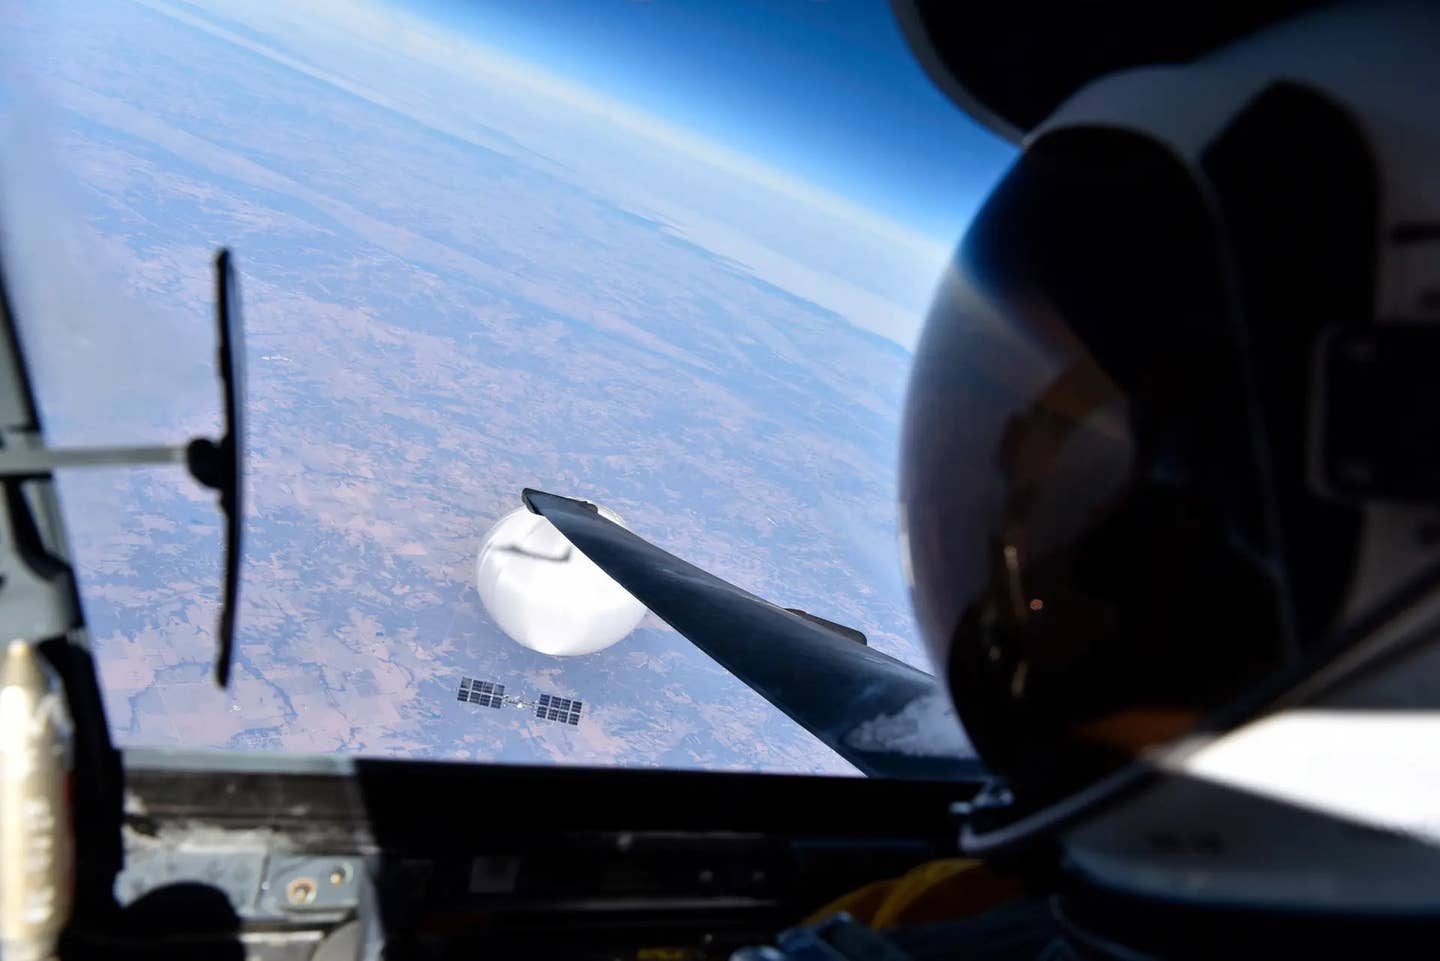 A picture taken from a US Air Force U-2S Dragon Lady spy plane of the Chinese spy balloon over the United States earlier this year. No pictures or videos of the three other objects shot down over the United States and Canada have been released to date. <em>USAF</em>